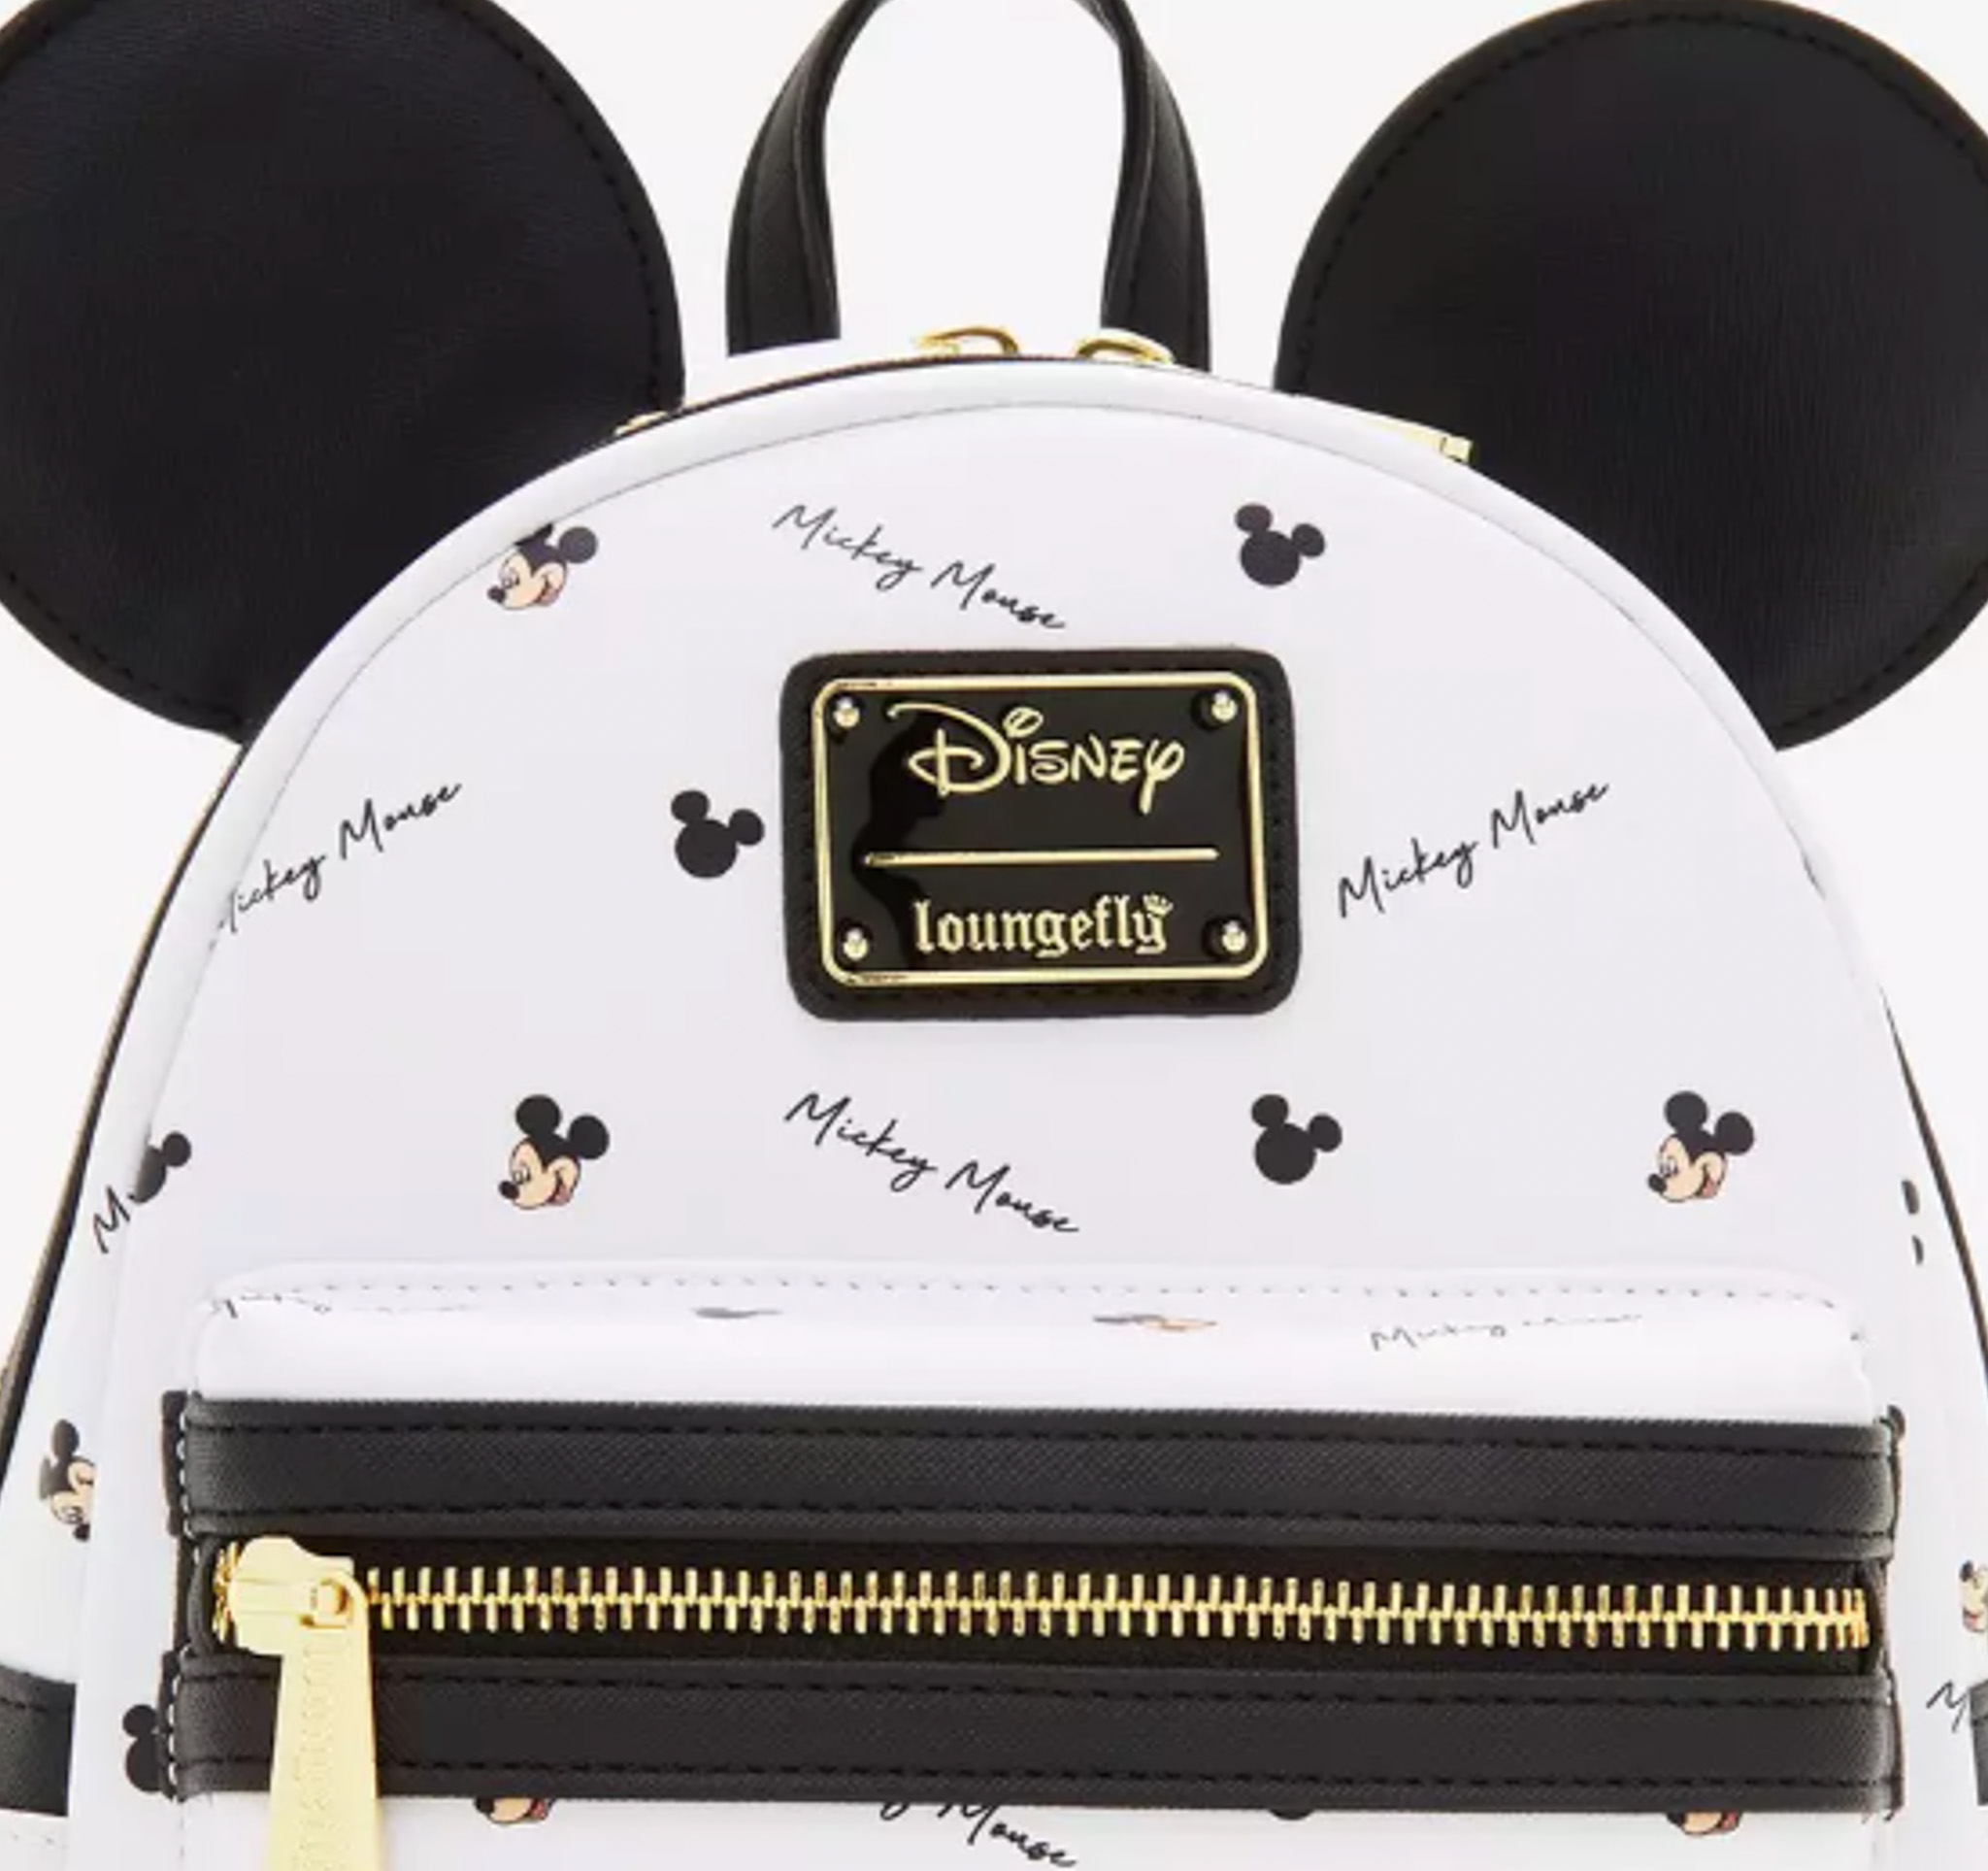 7 Disney Loungeflys on SALE With a HUGE Buy One, Get One 50% Off Deal ...